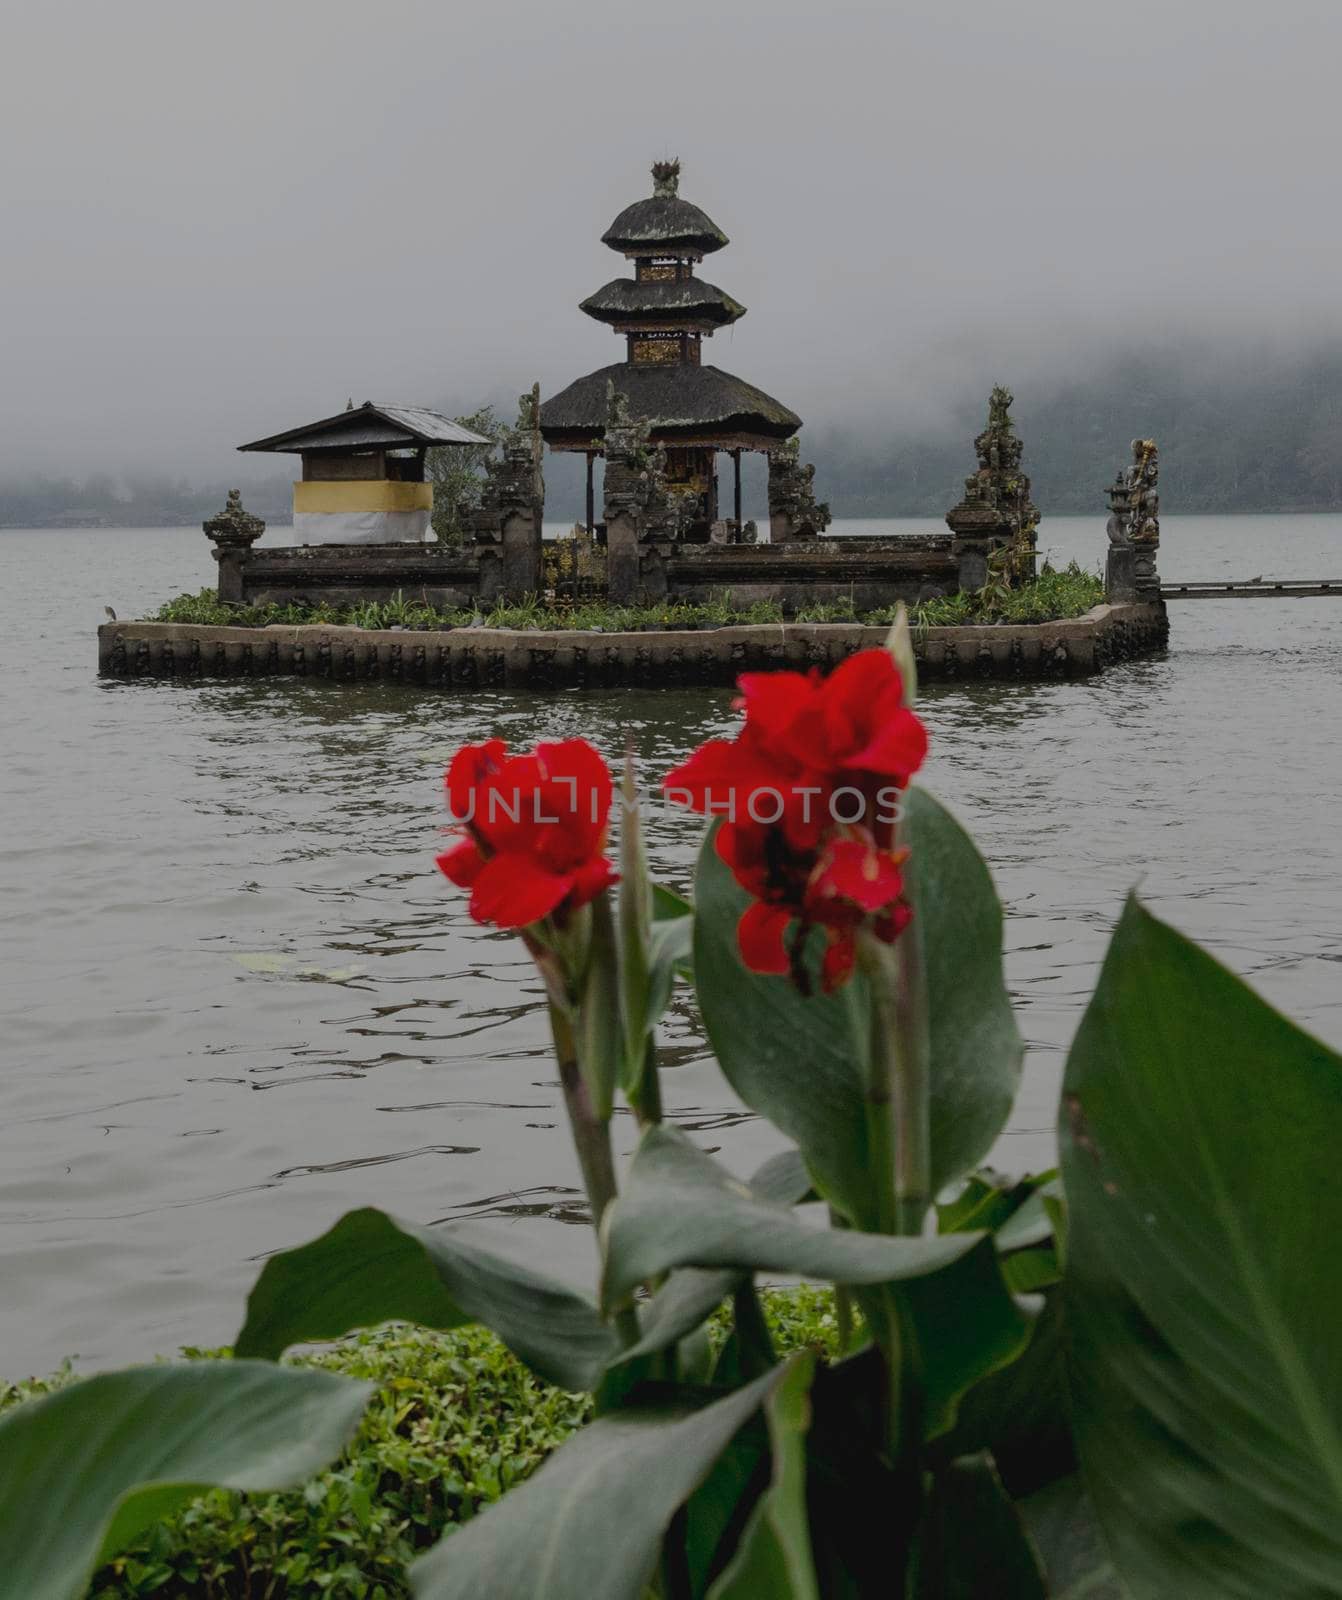 Floating temple in Bali